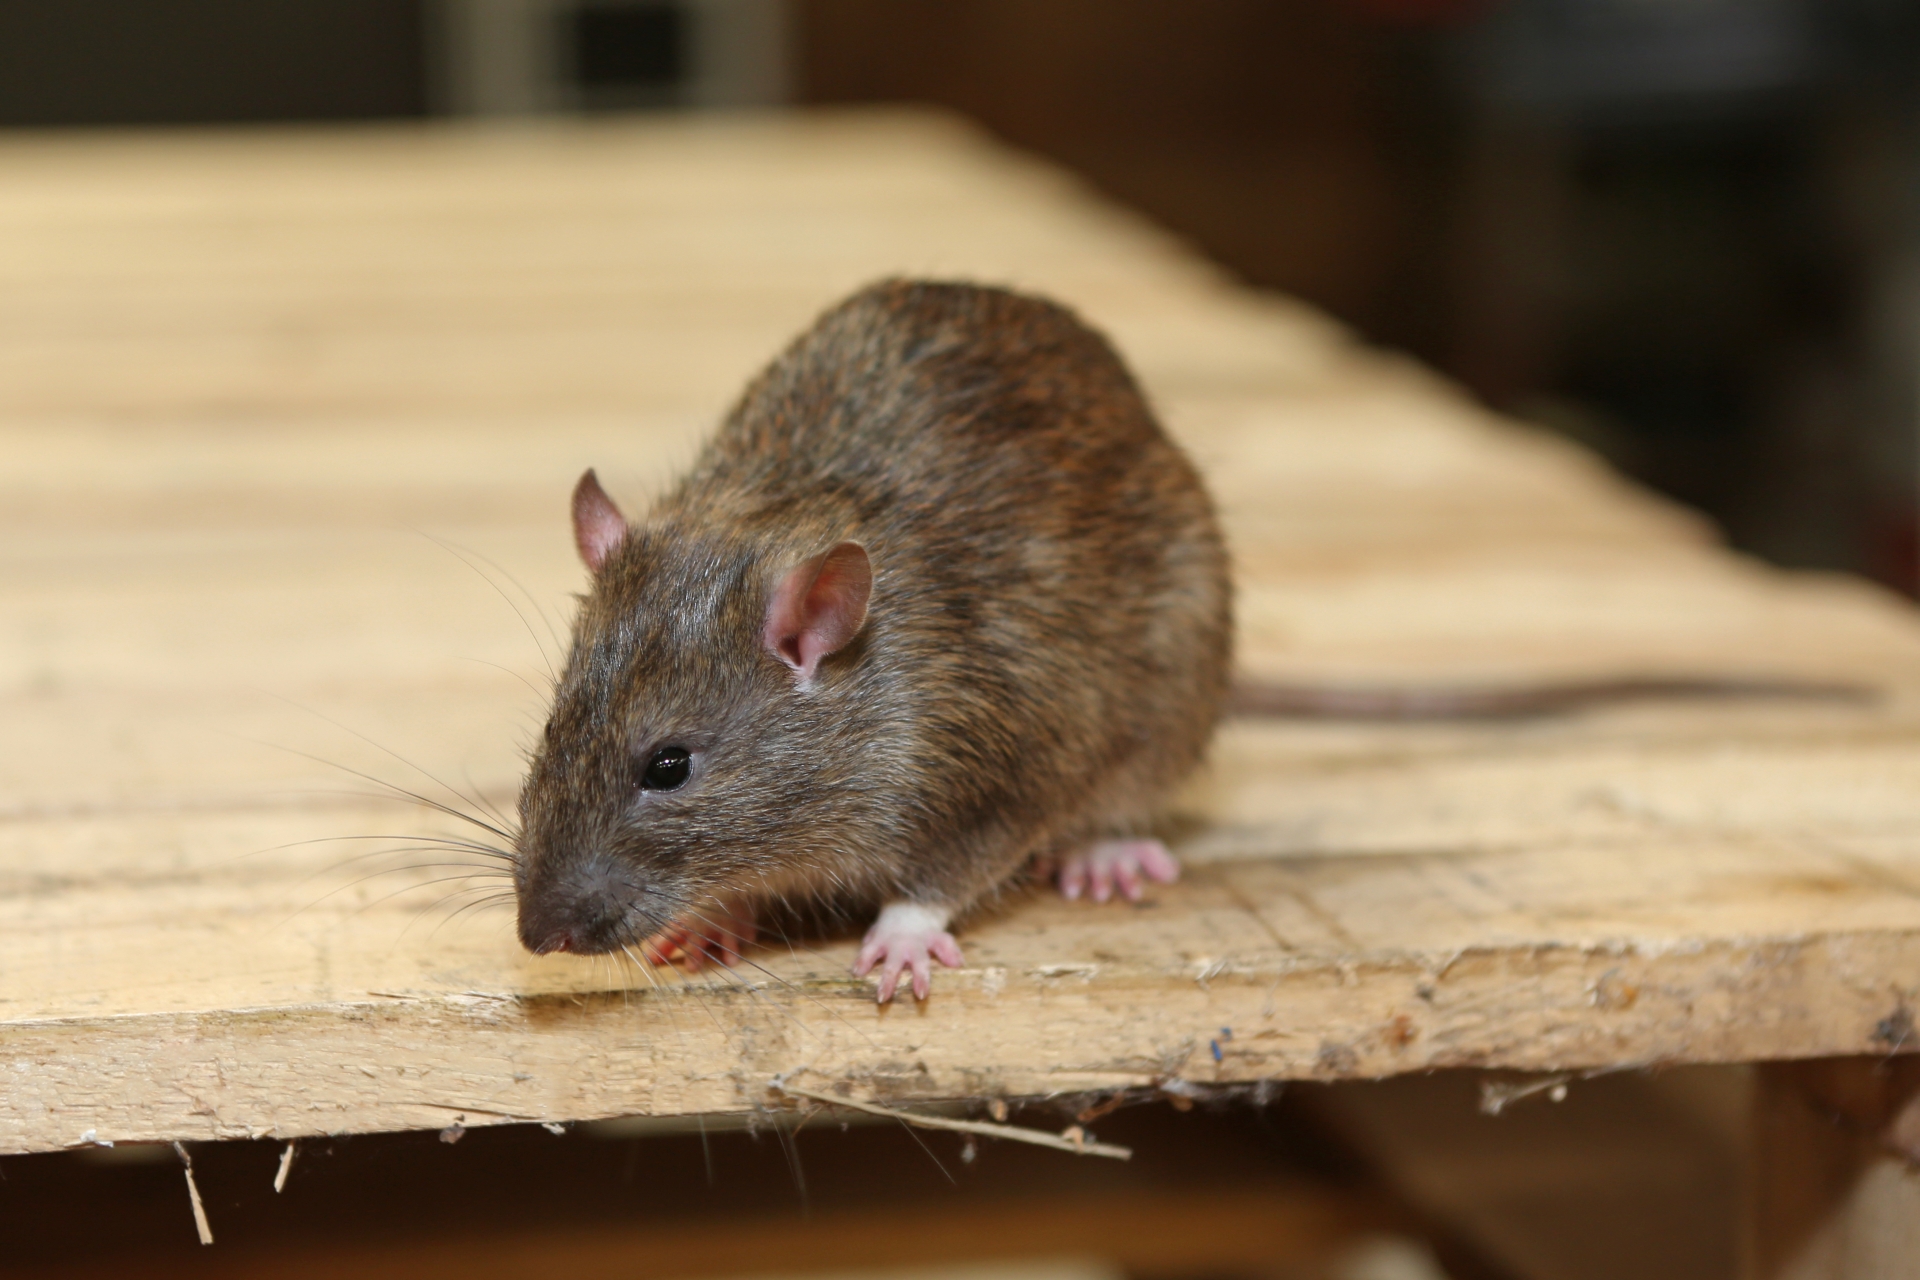 Rat extermination, Pest Control in Chelsea, SW3. Call Now 020 8166 9746